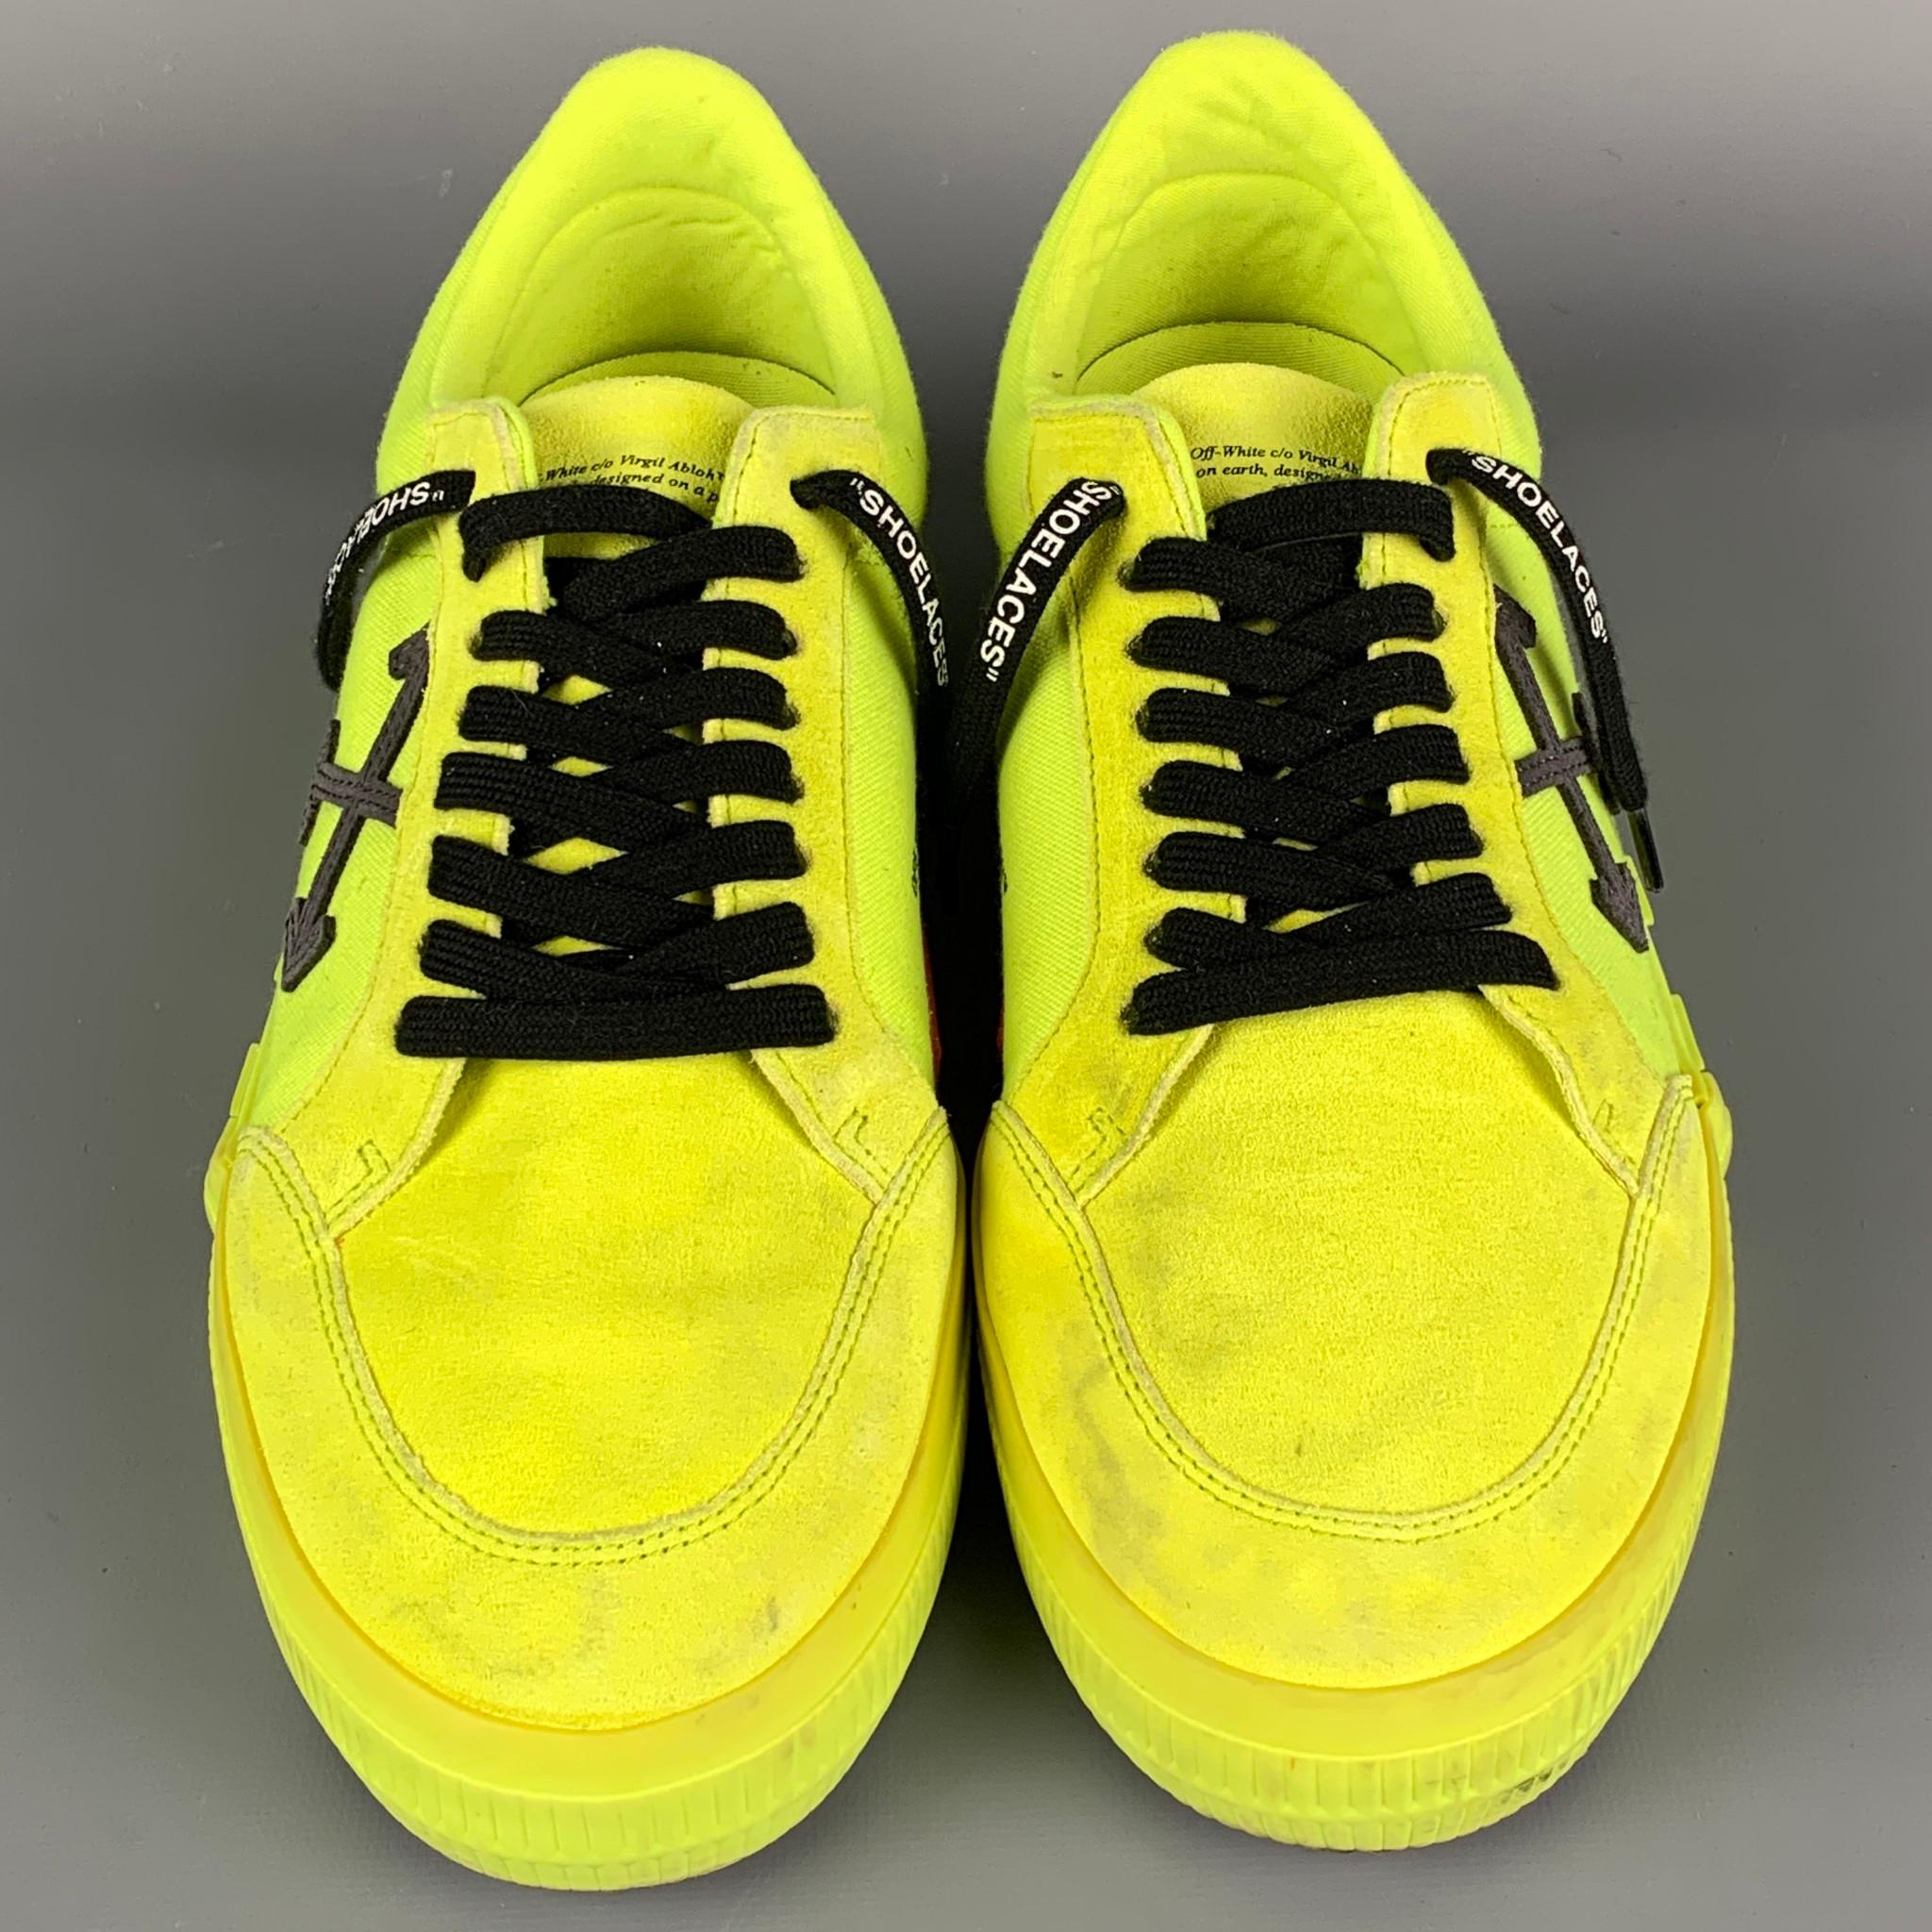 neon yellow shoes